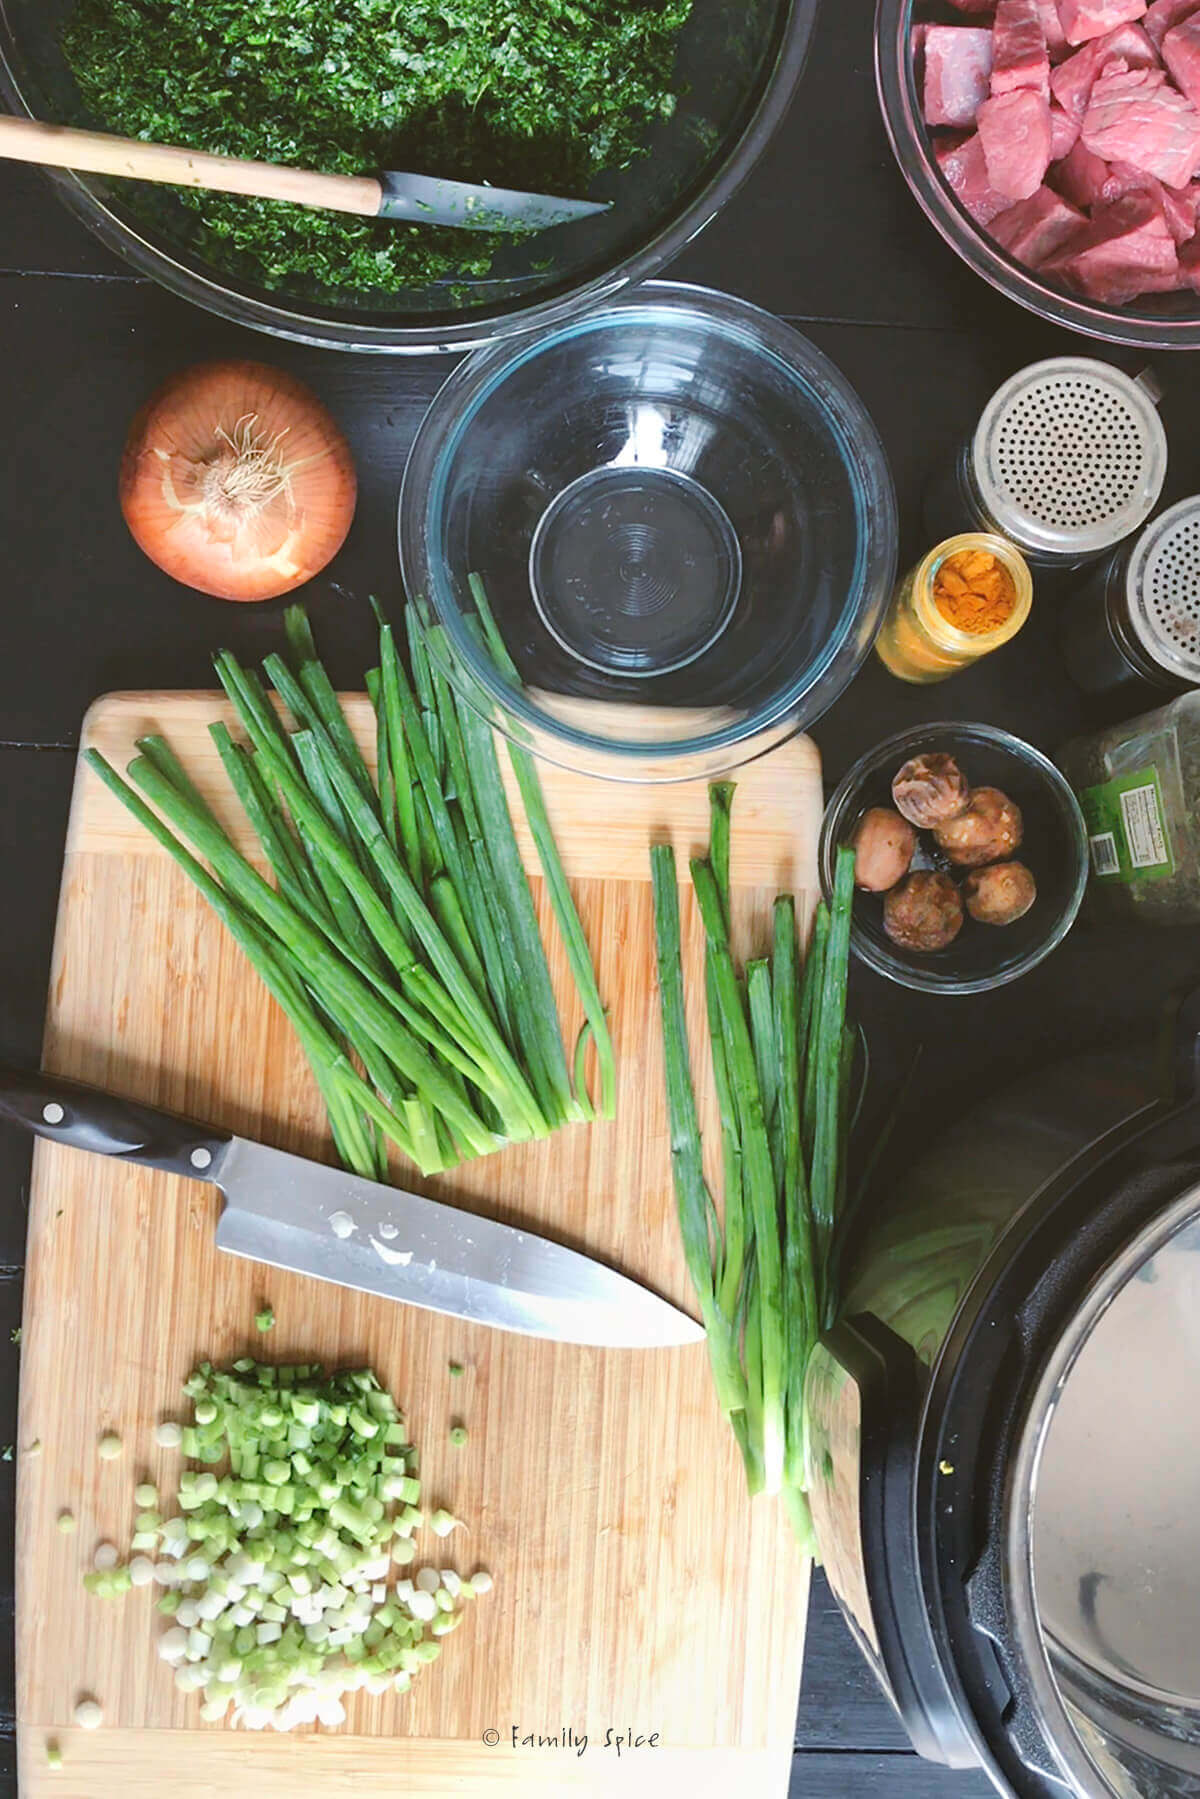 Chopping green onions on a wooden cutting board with other ingredients next to it